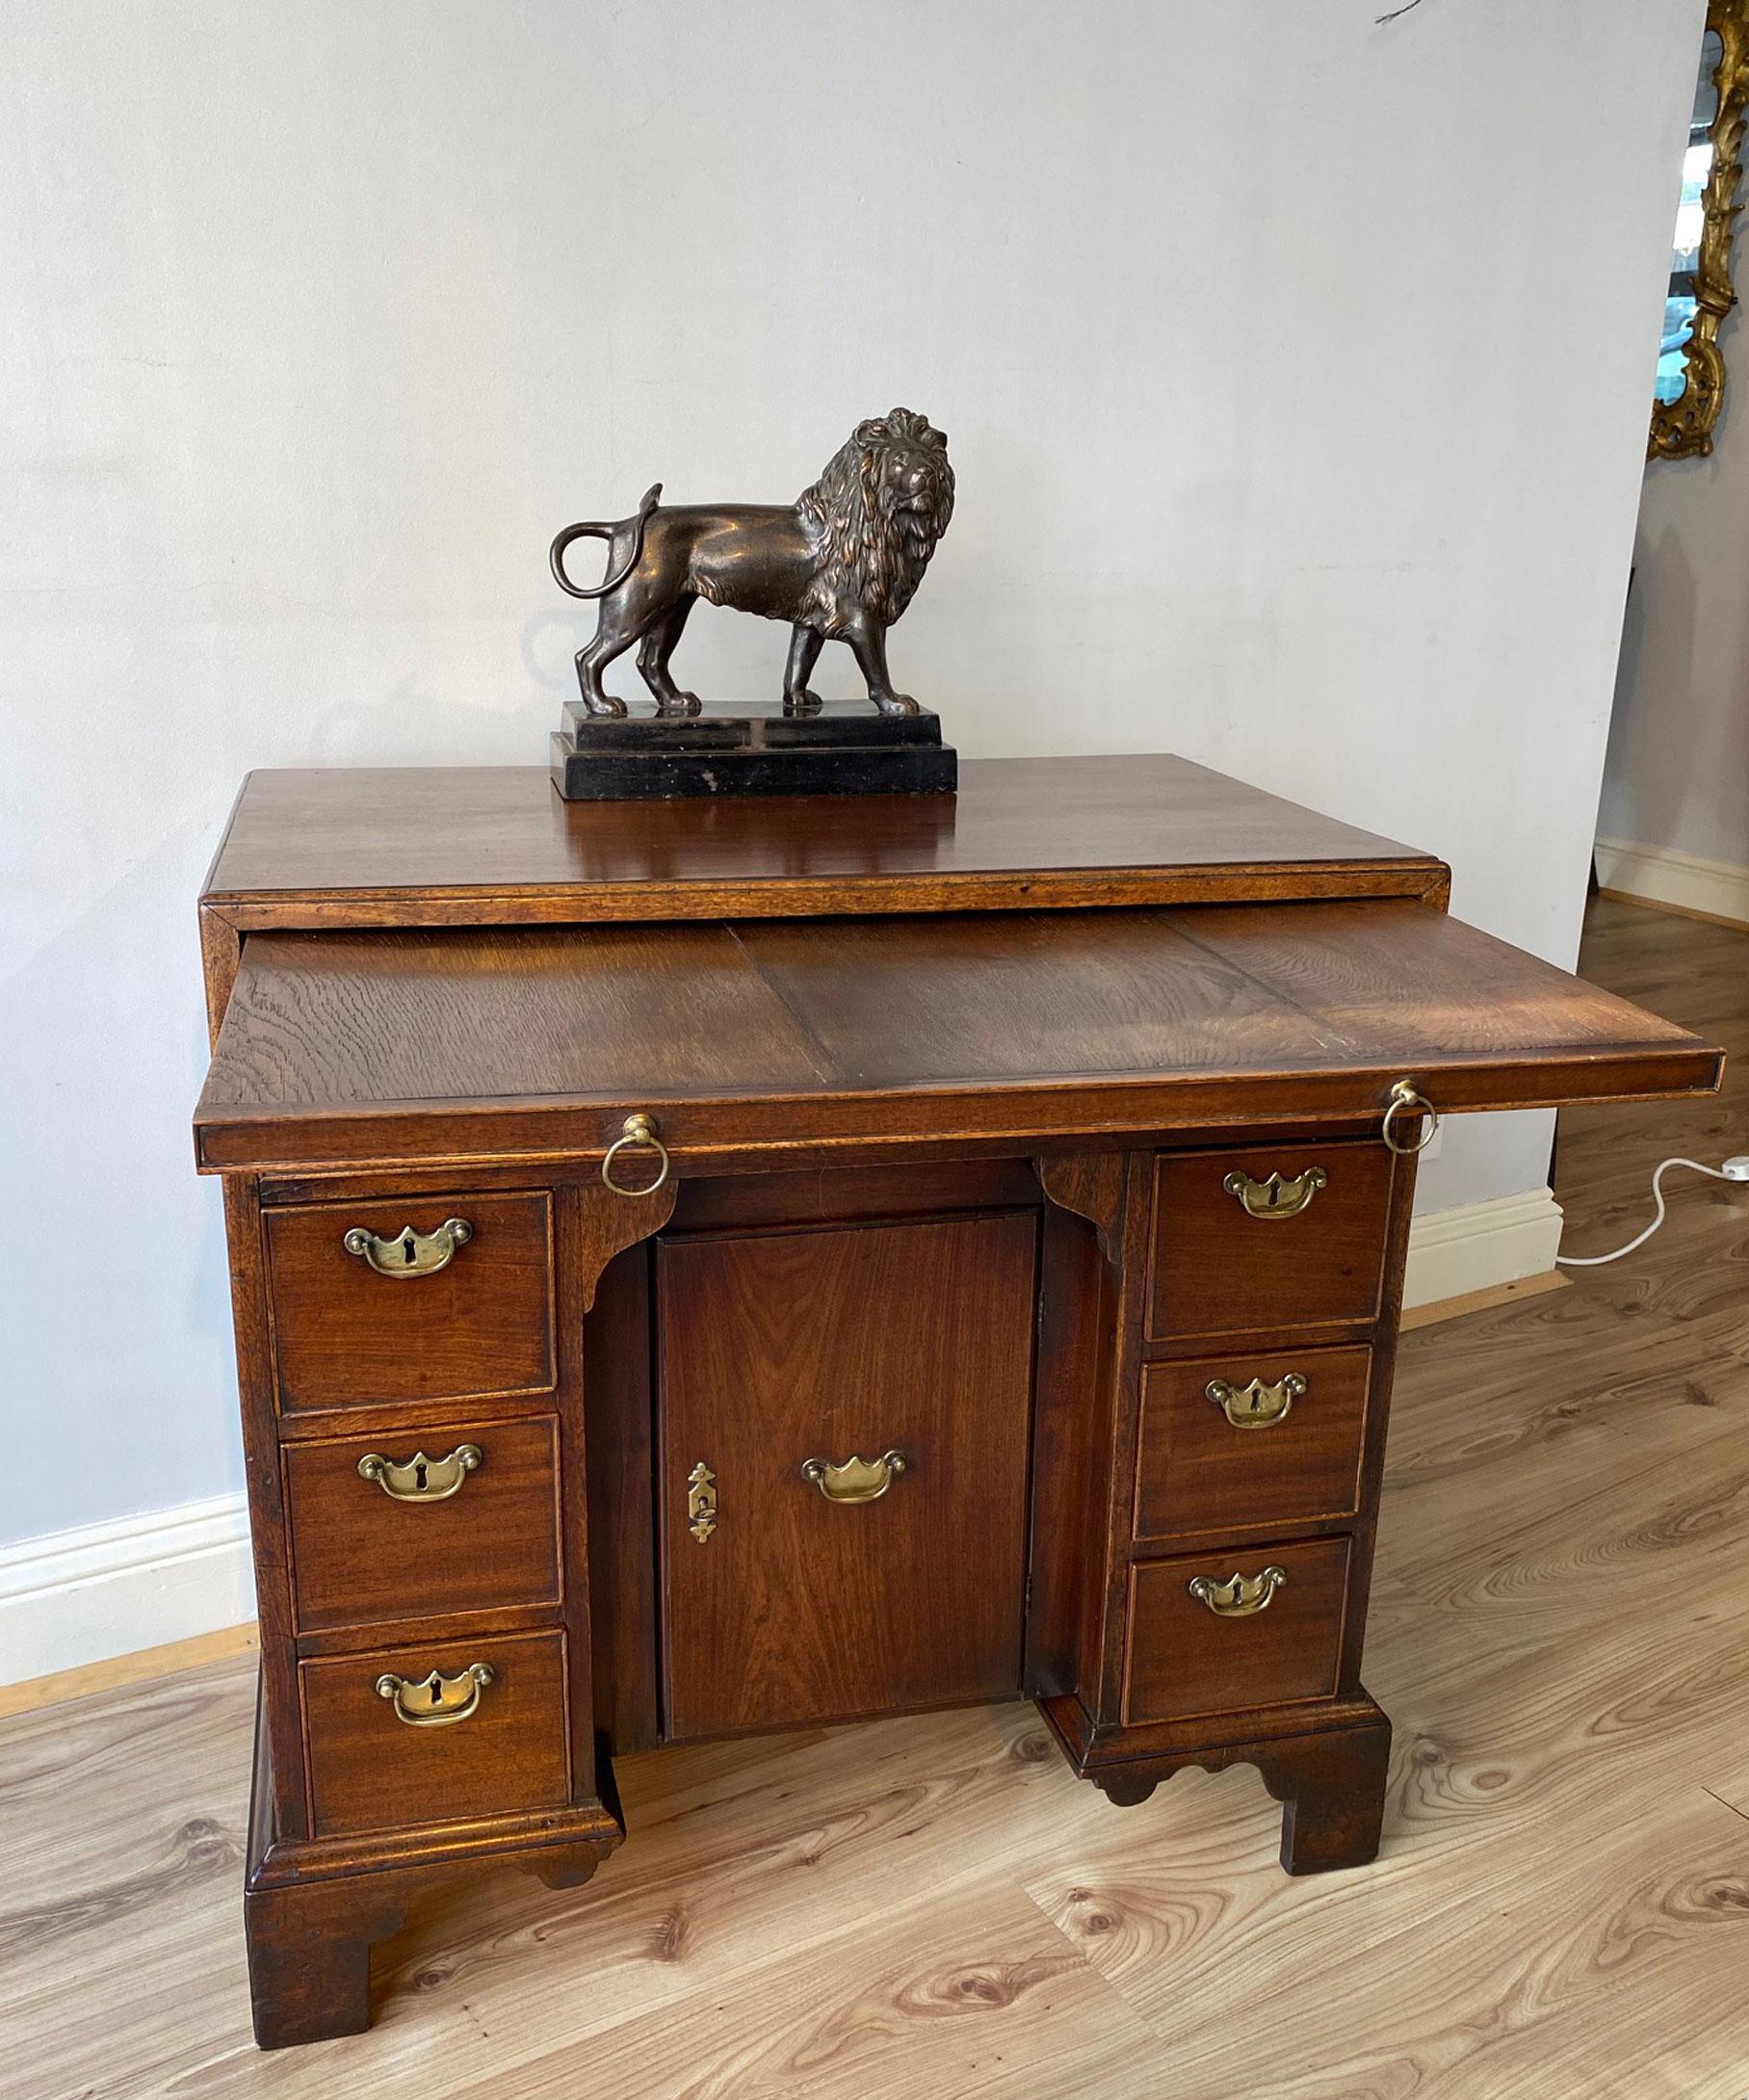 A fine George II mahogany kneehole desk with cabinet-maker or retailer's label for Lowdell, Southwark. The desk's caddy moulded top above a brushing slide and a long drawer; having a central pull-forward door flanked by banks of three graduated